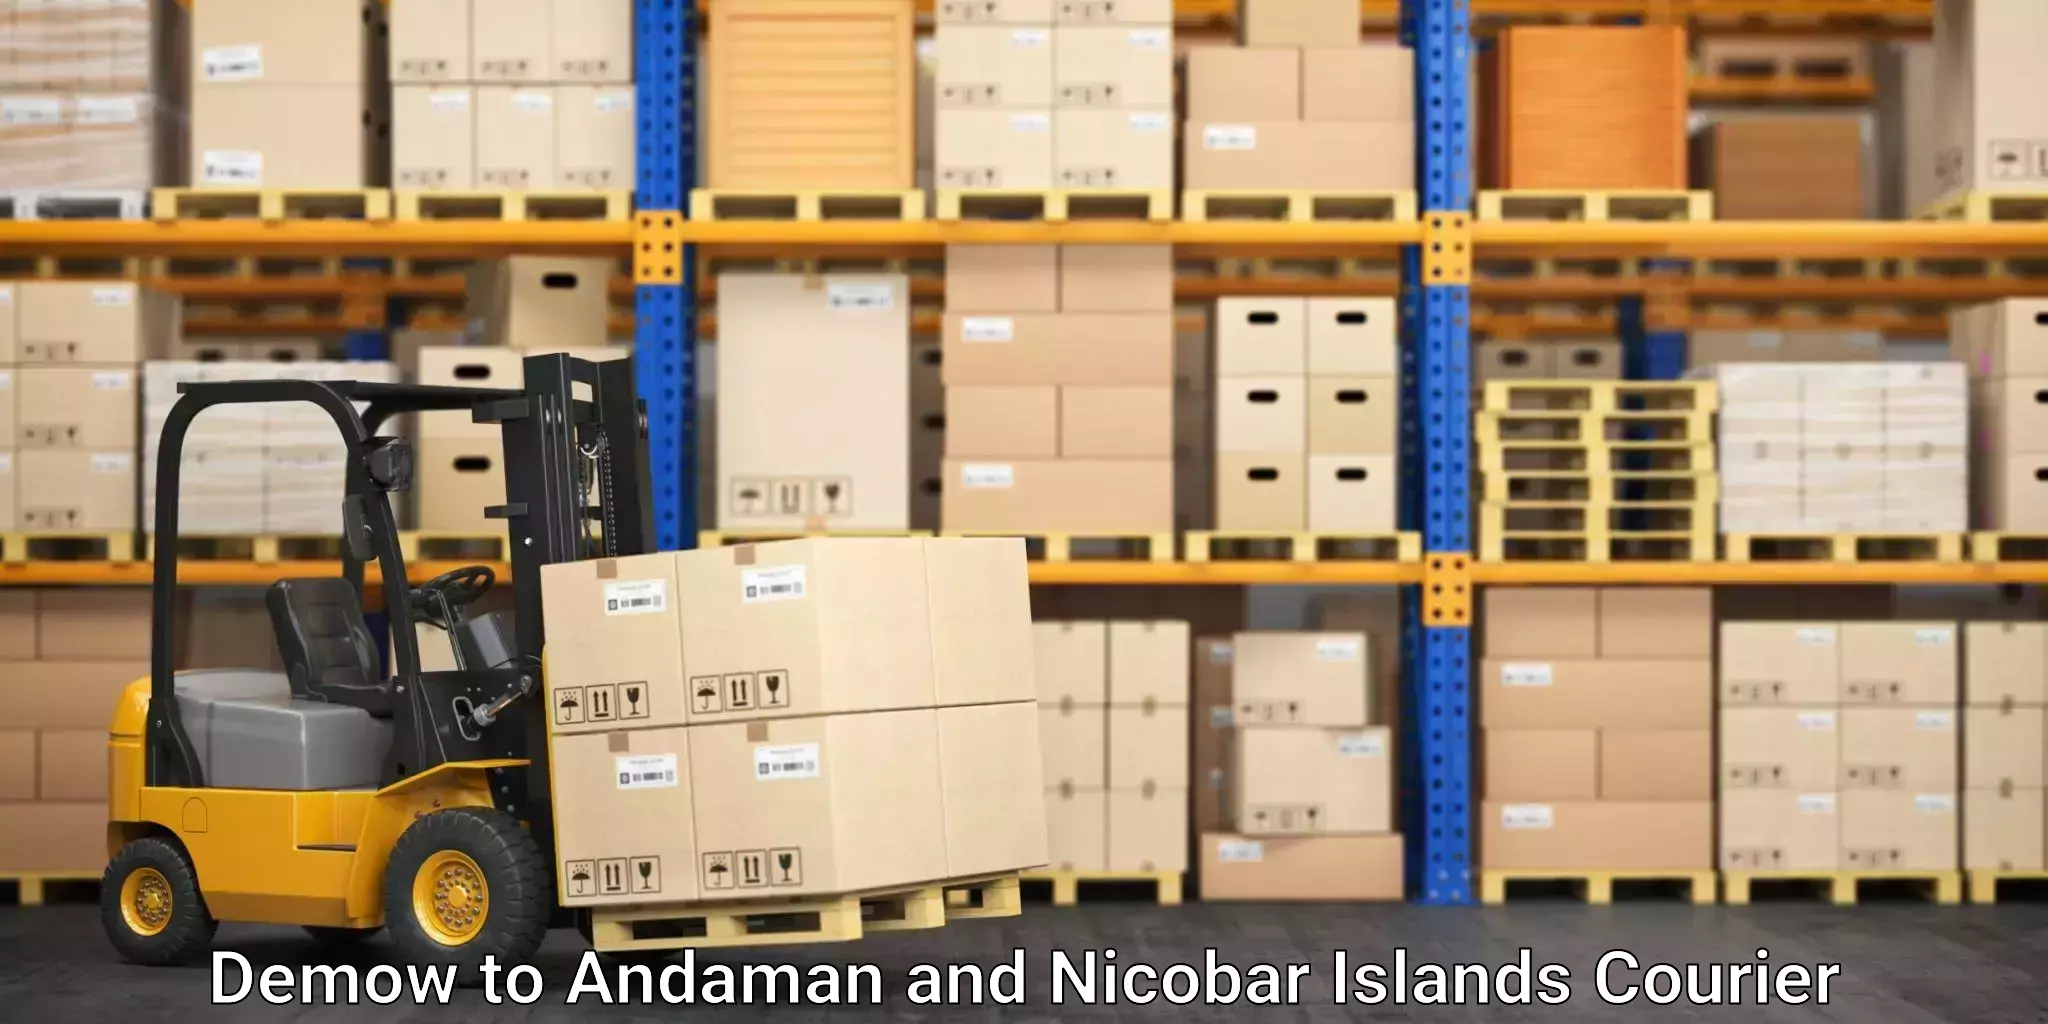 Courier service efficiency Demow to Andaman and Nicobar Islands